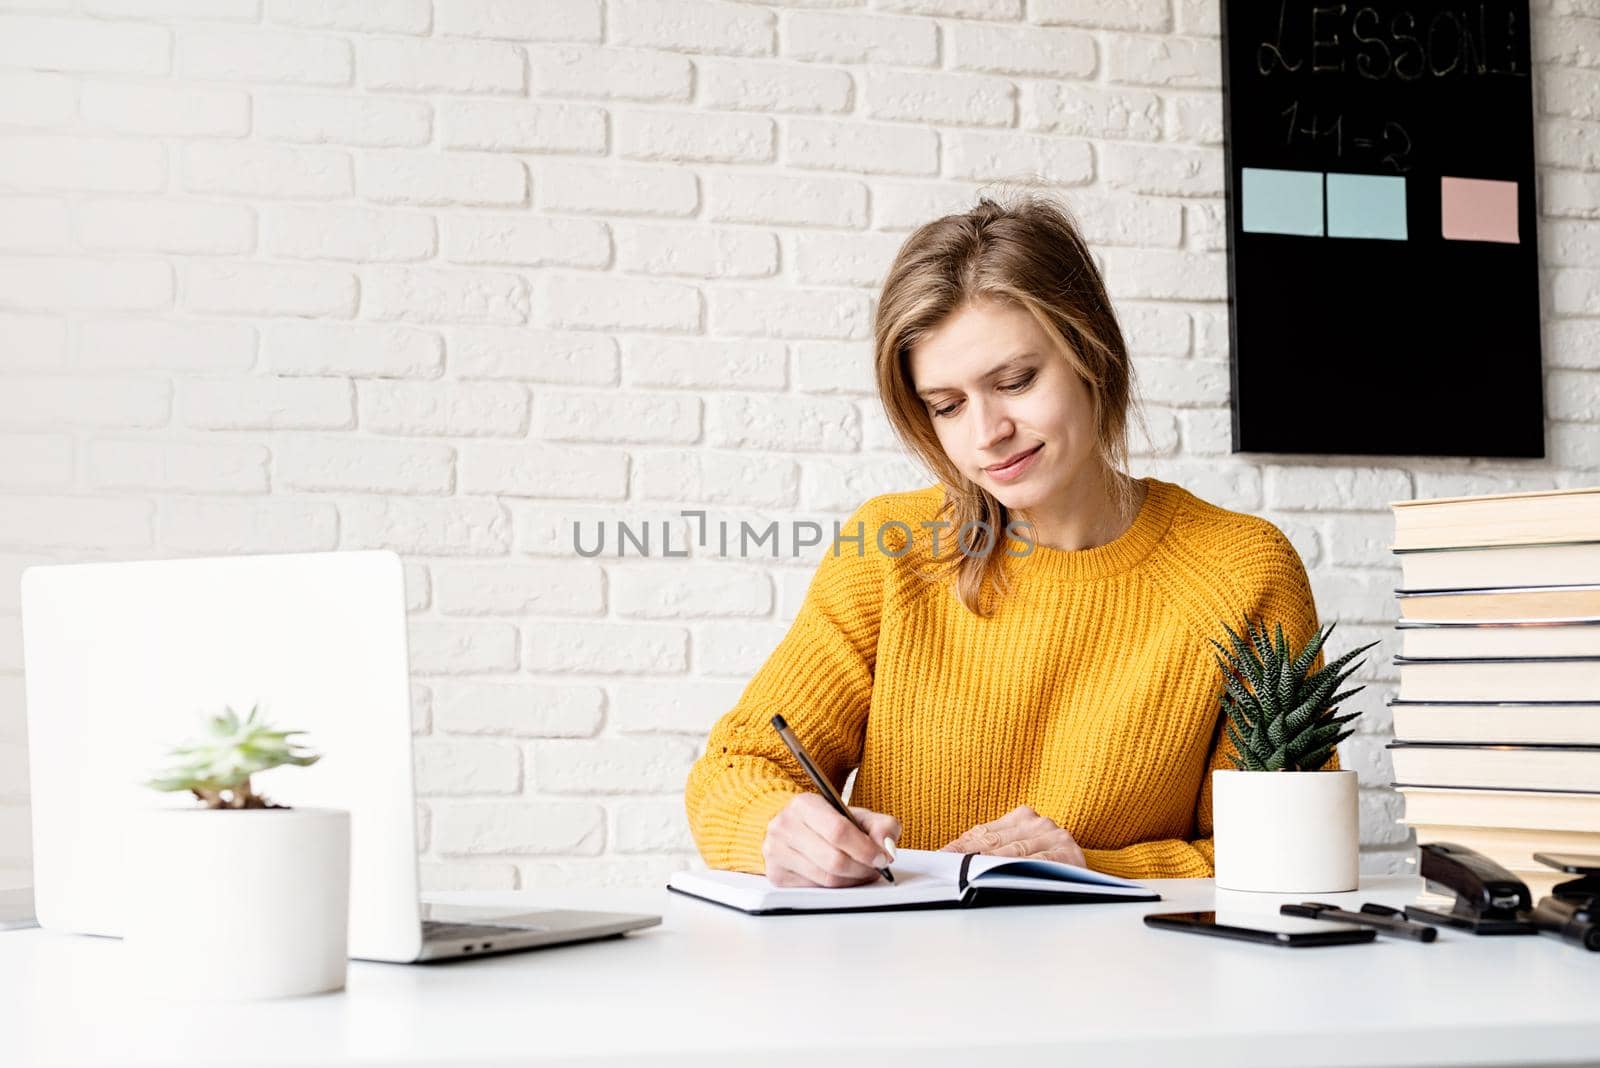 Distance learning. E-learning. Young smiling woman in yellow sweater studying online using laptop writing in notebook